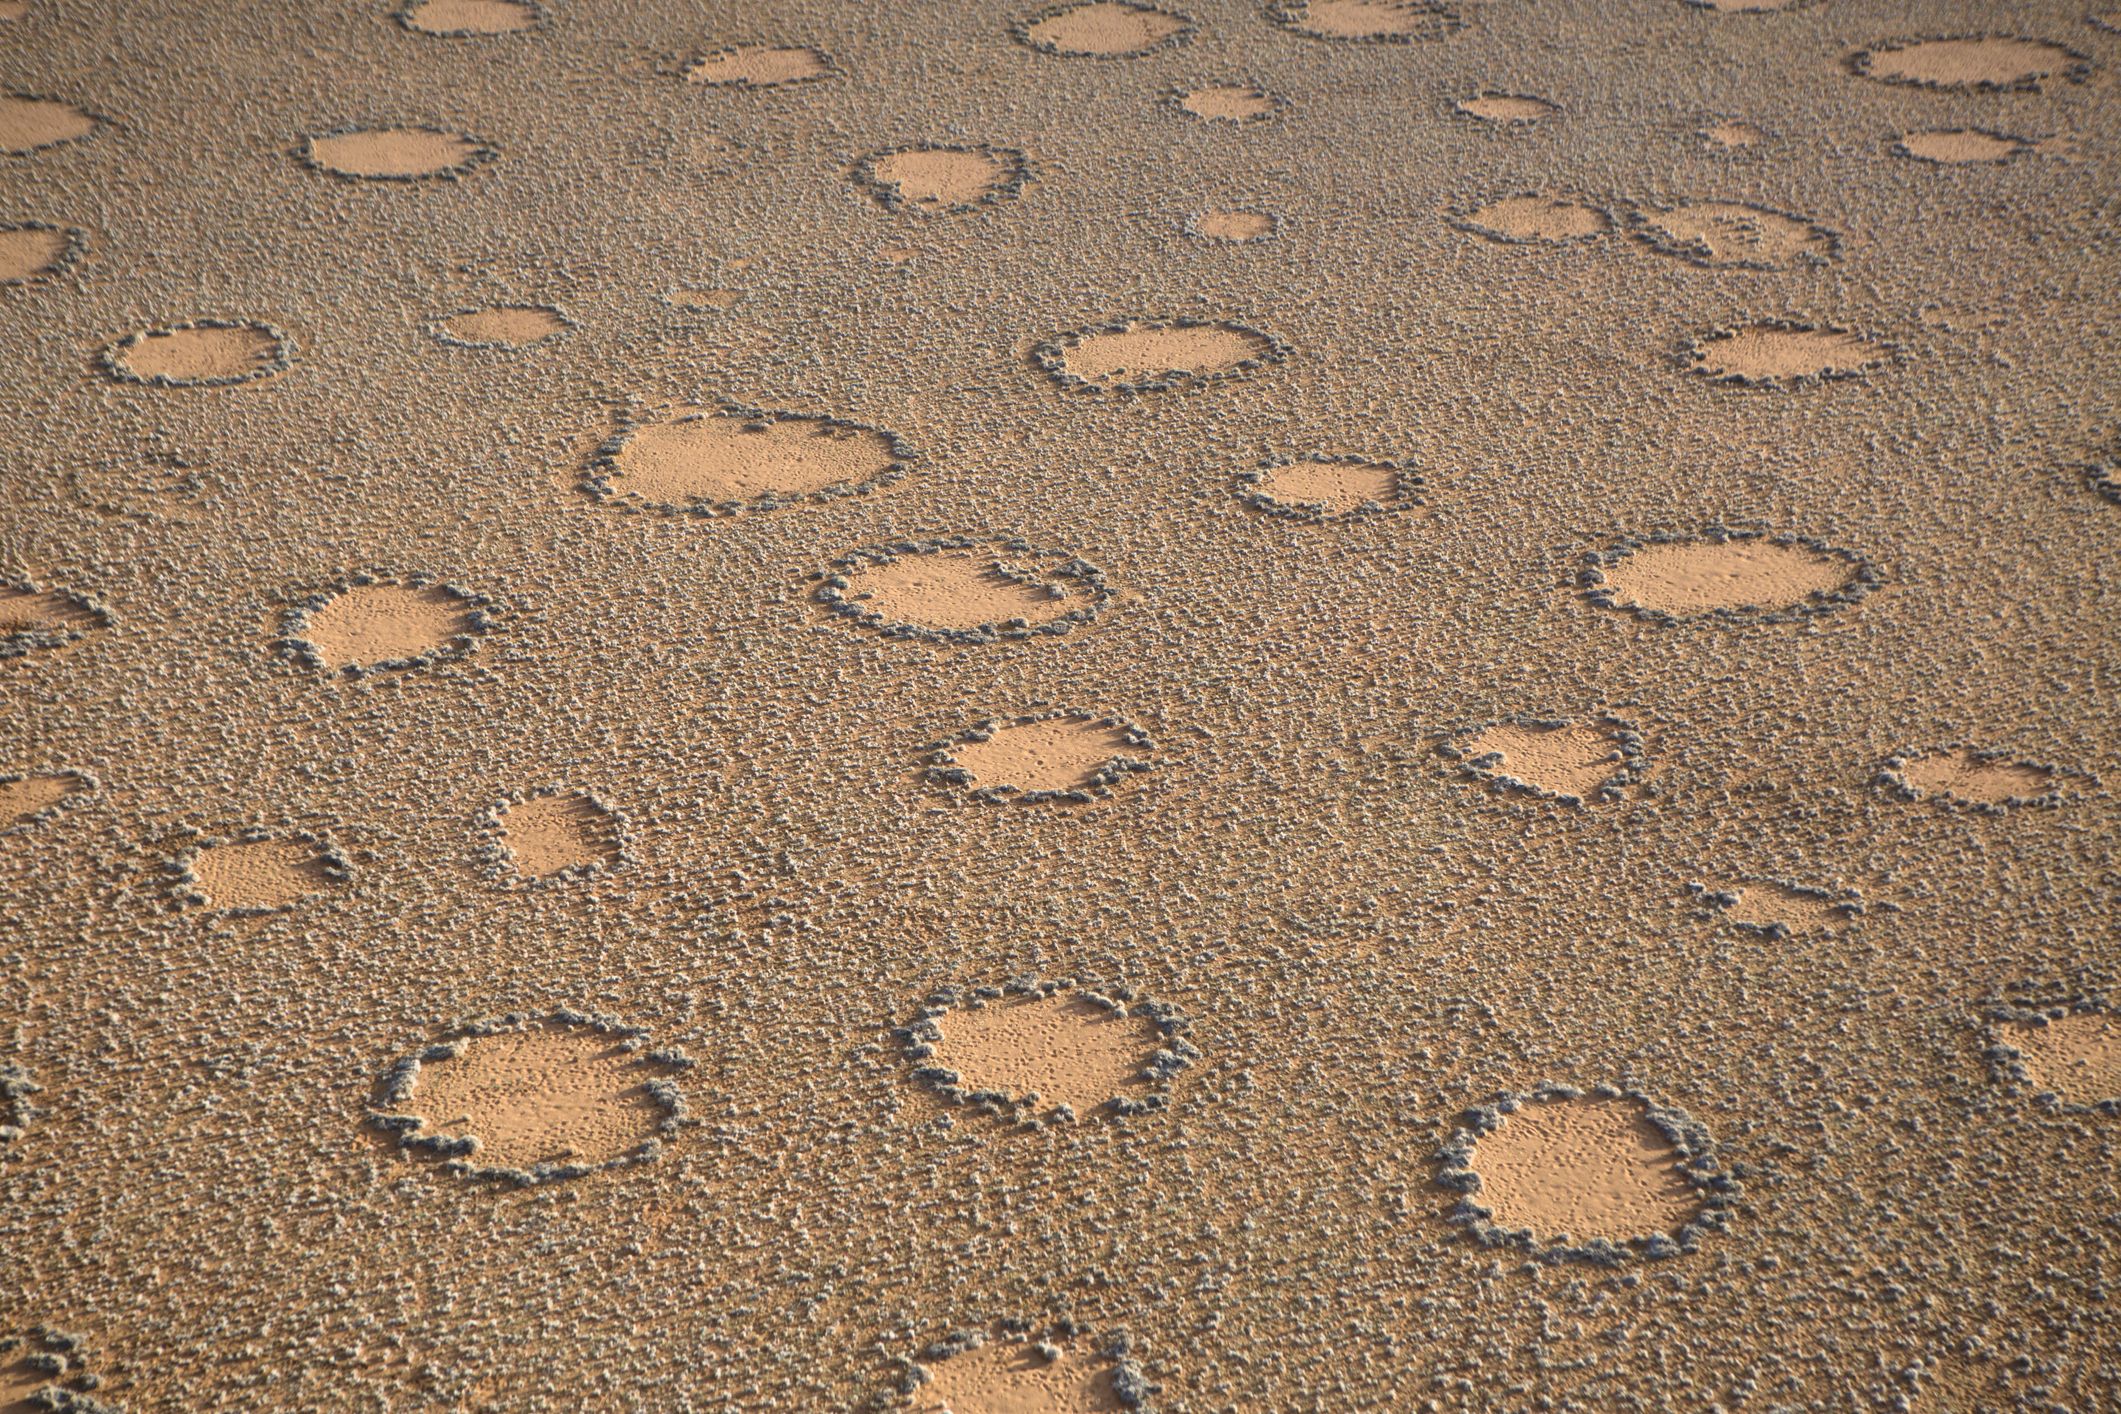 Fairy Circles May Now Exist in 15 Countries. So What Are They?